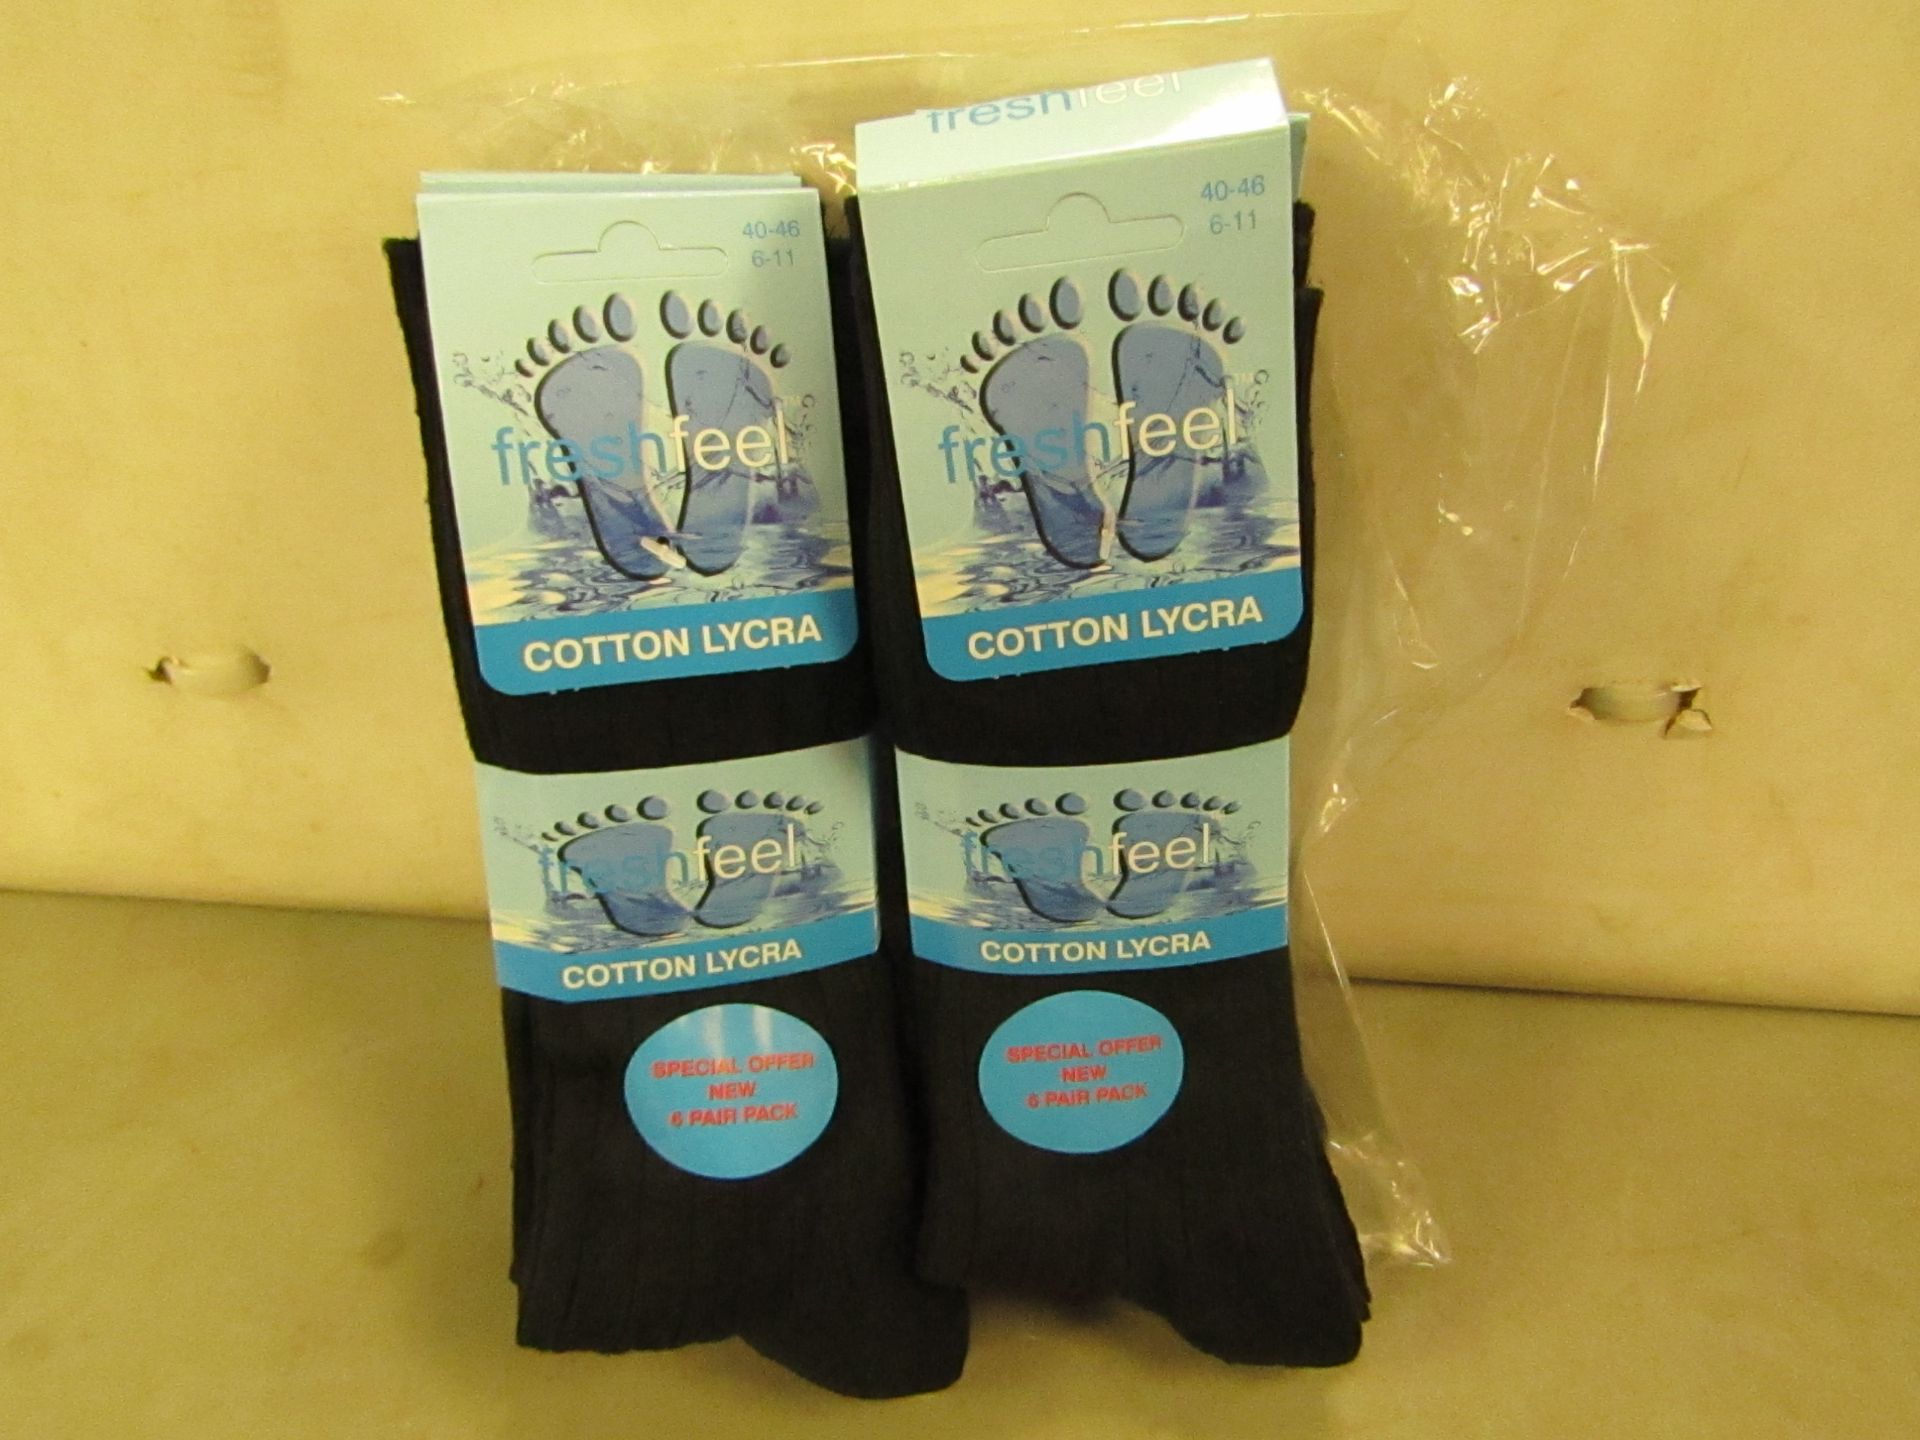 12 X Pairs of Fresh Feel Cotton Lycra Socks Size 6-11 New & Packaged